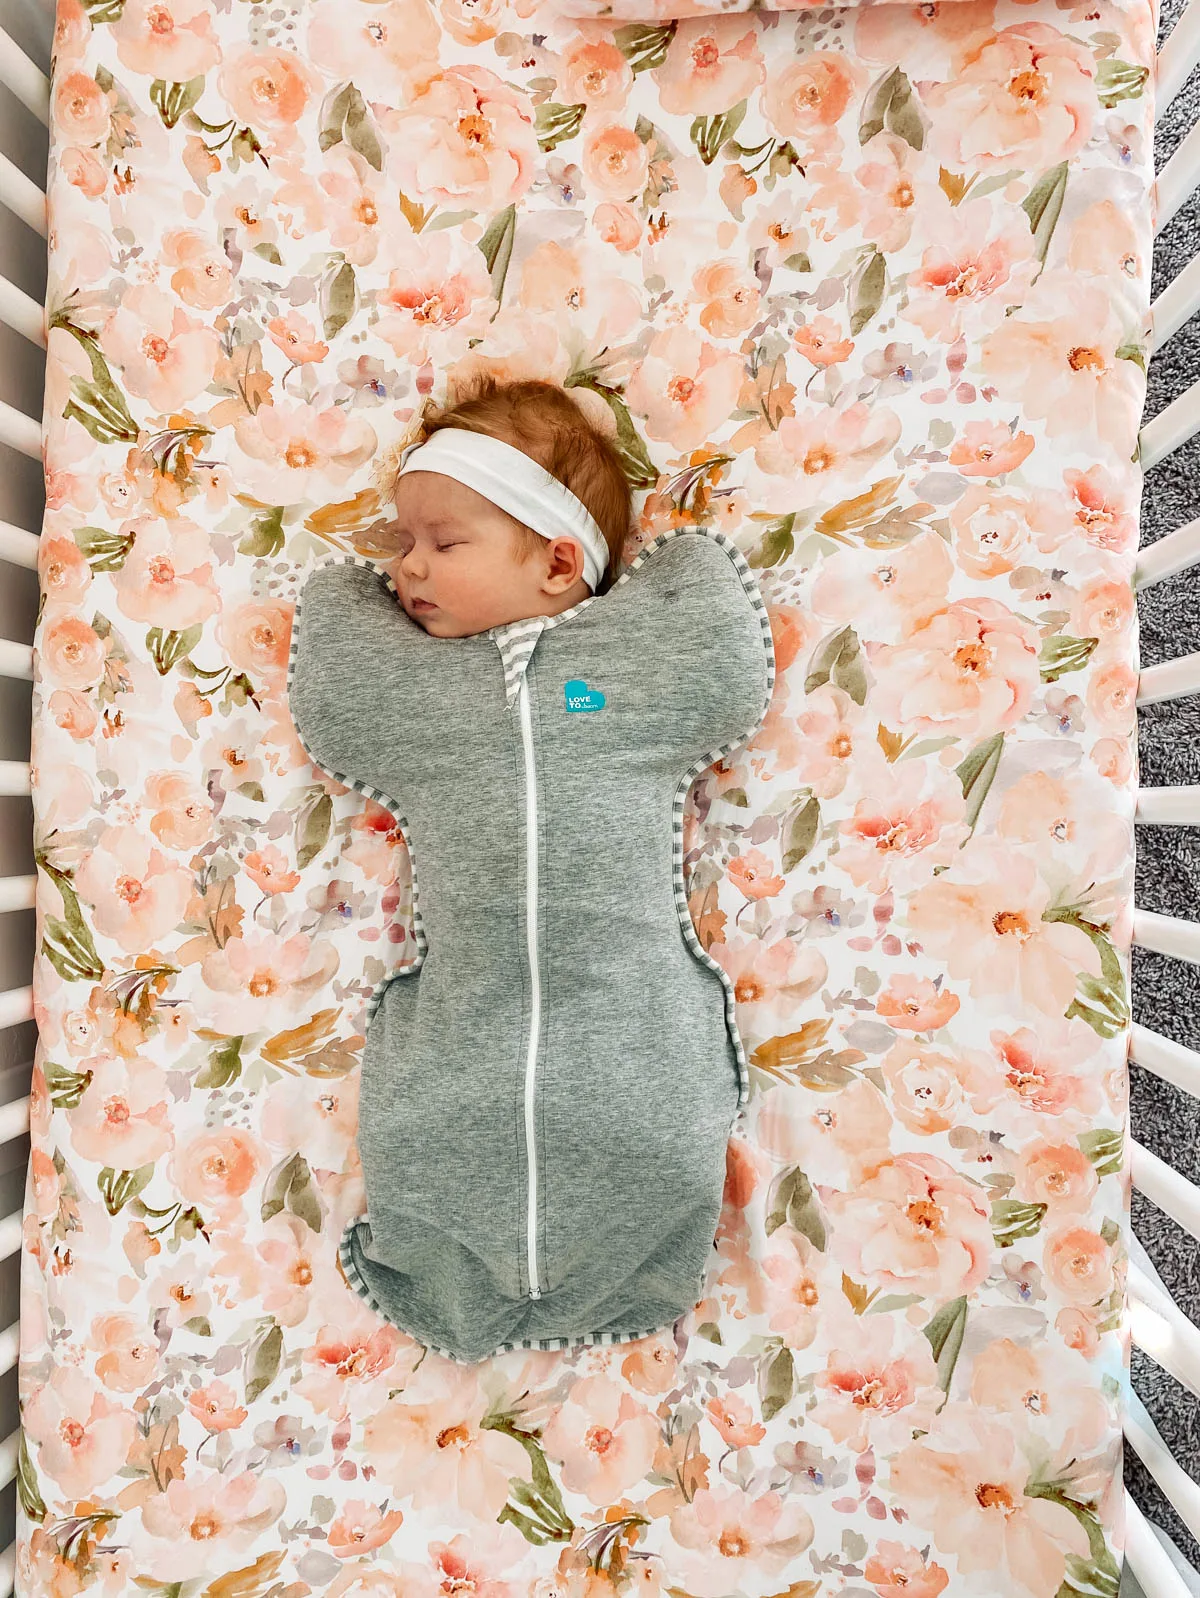 Baby wearing a zipper swaddle sleeps in white crib with peach floral sheet.